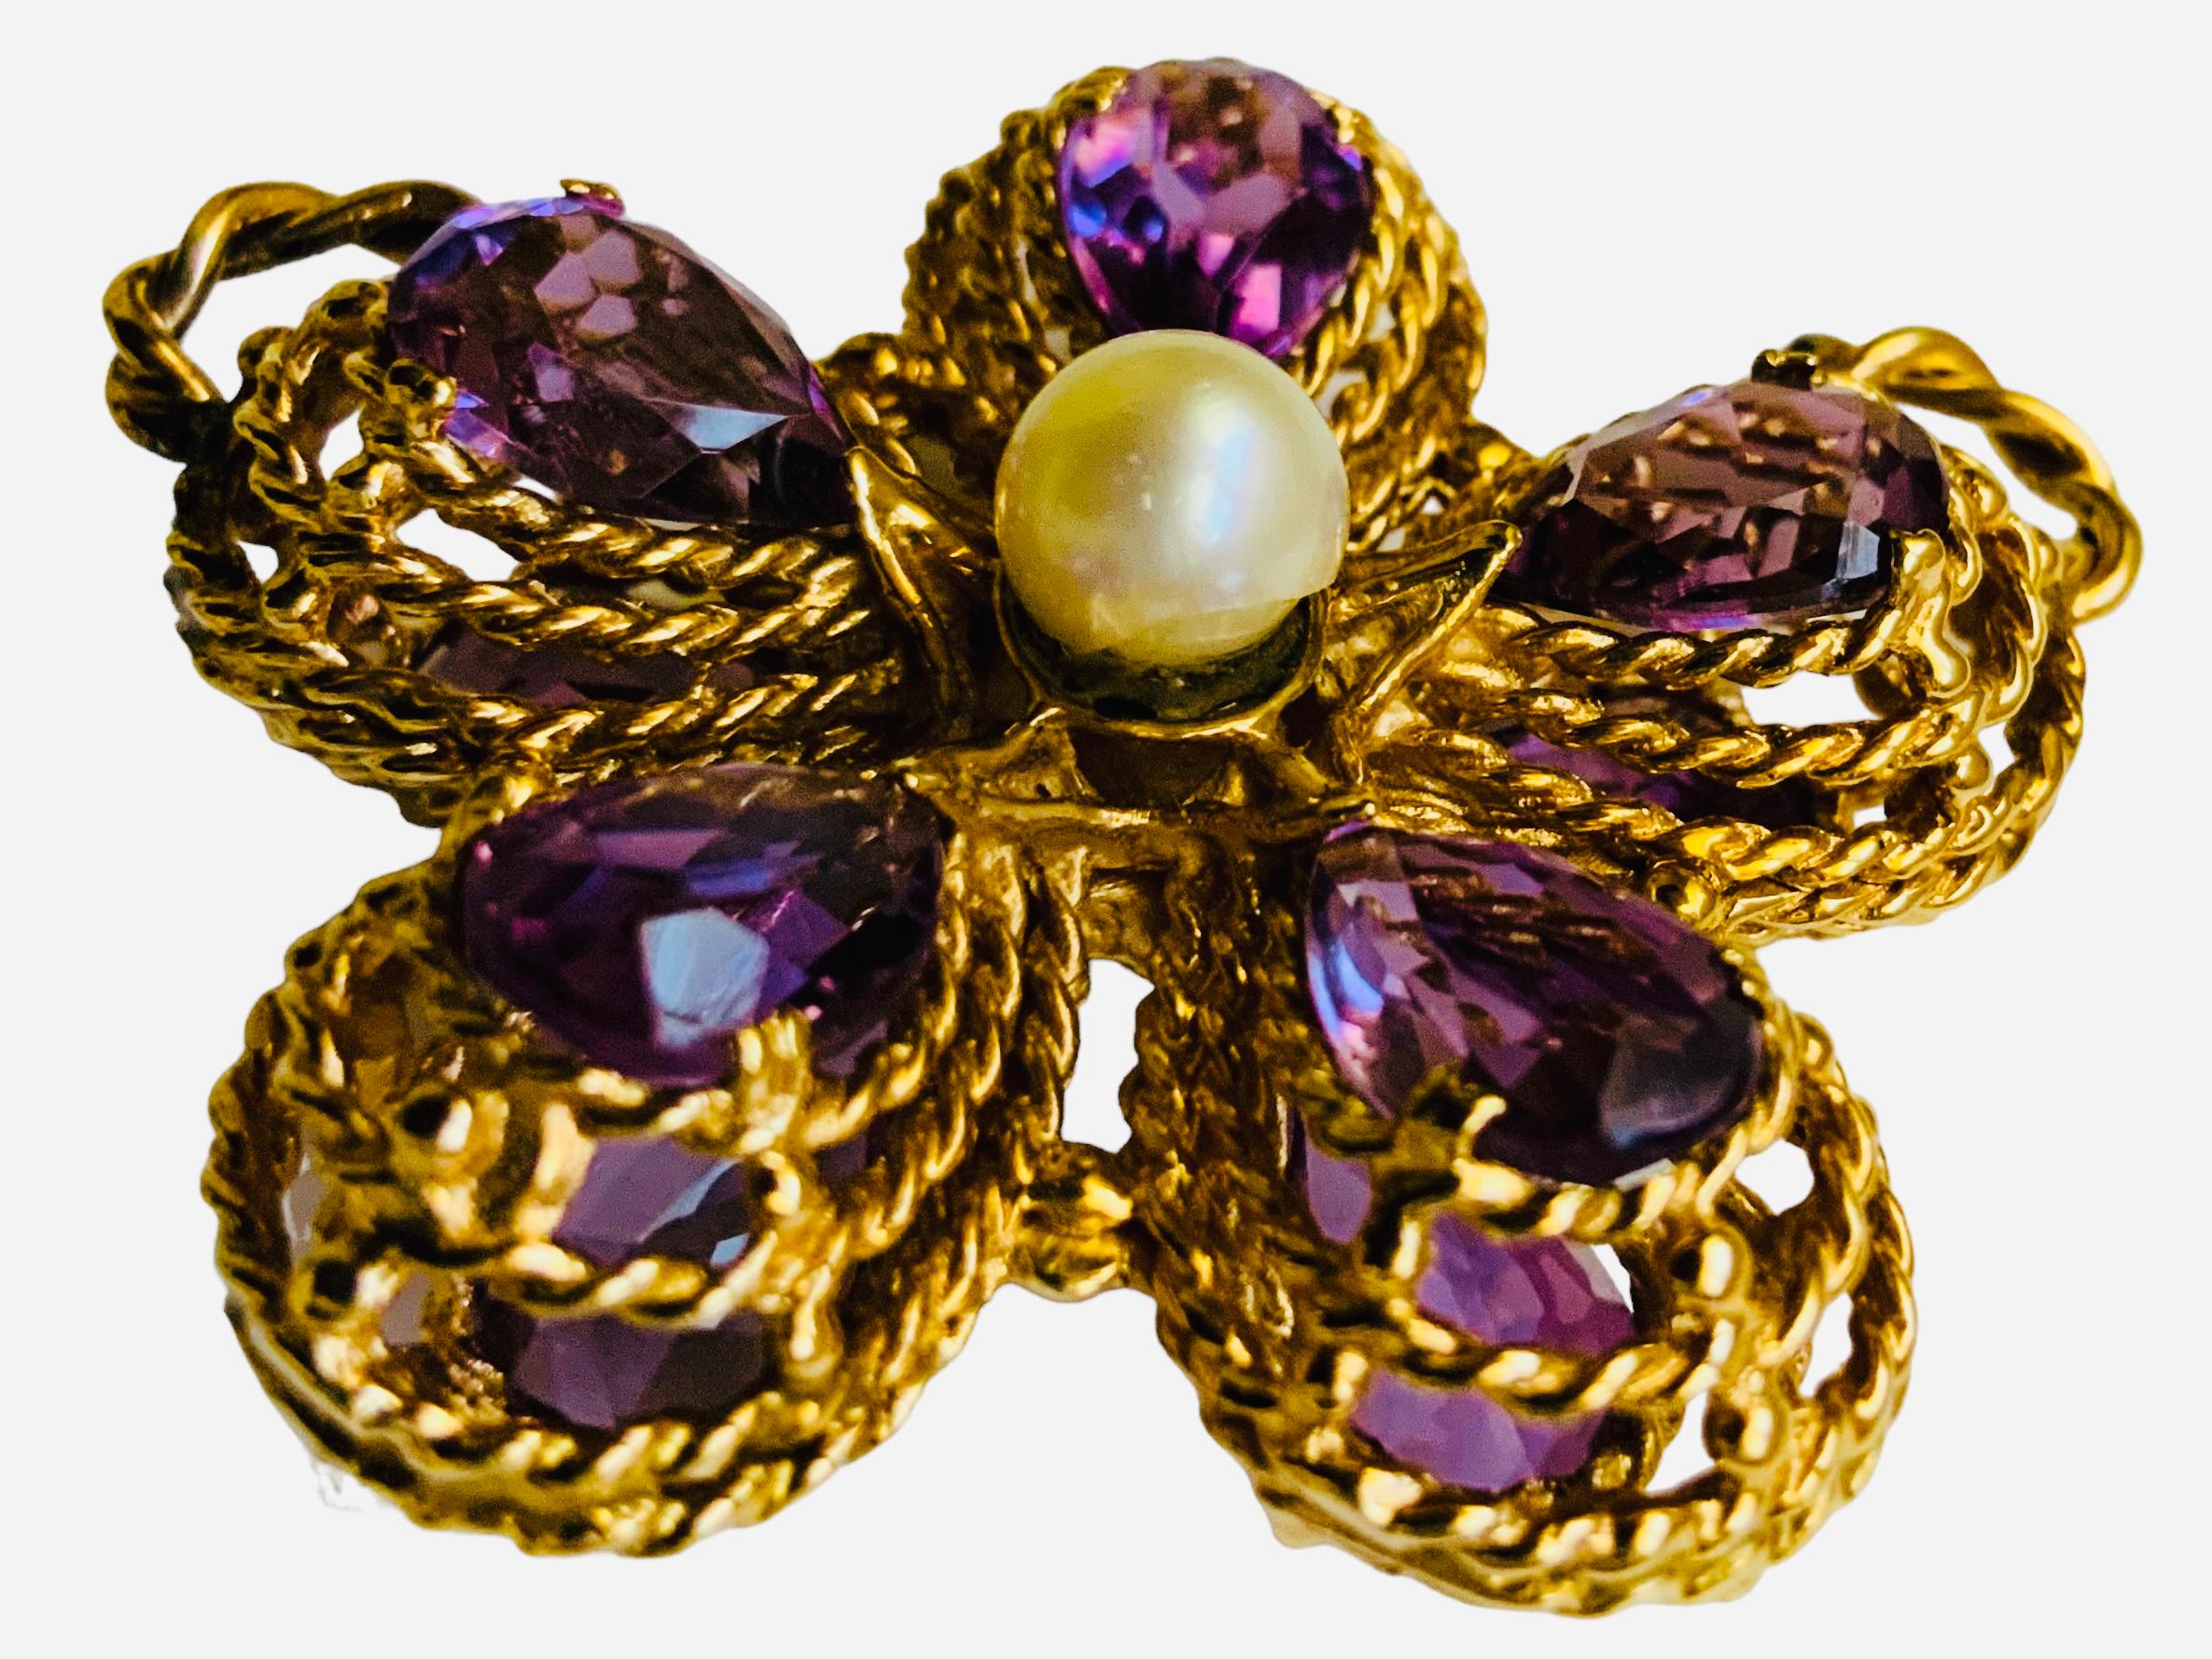 This is a 14K Gold Amethyst and Pearl Violet Flower Pendant. It depicts a front and back large violet flower petals made of ten pear shaped amethysts mounted in  several gold braided ropes and embellished in the center by two round pearls seated